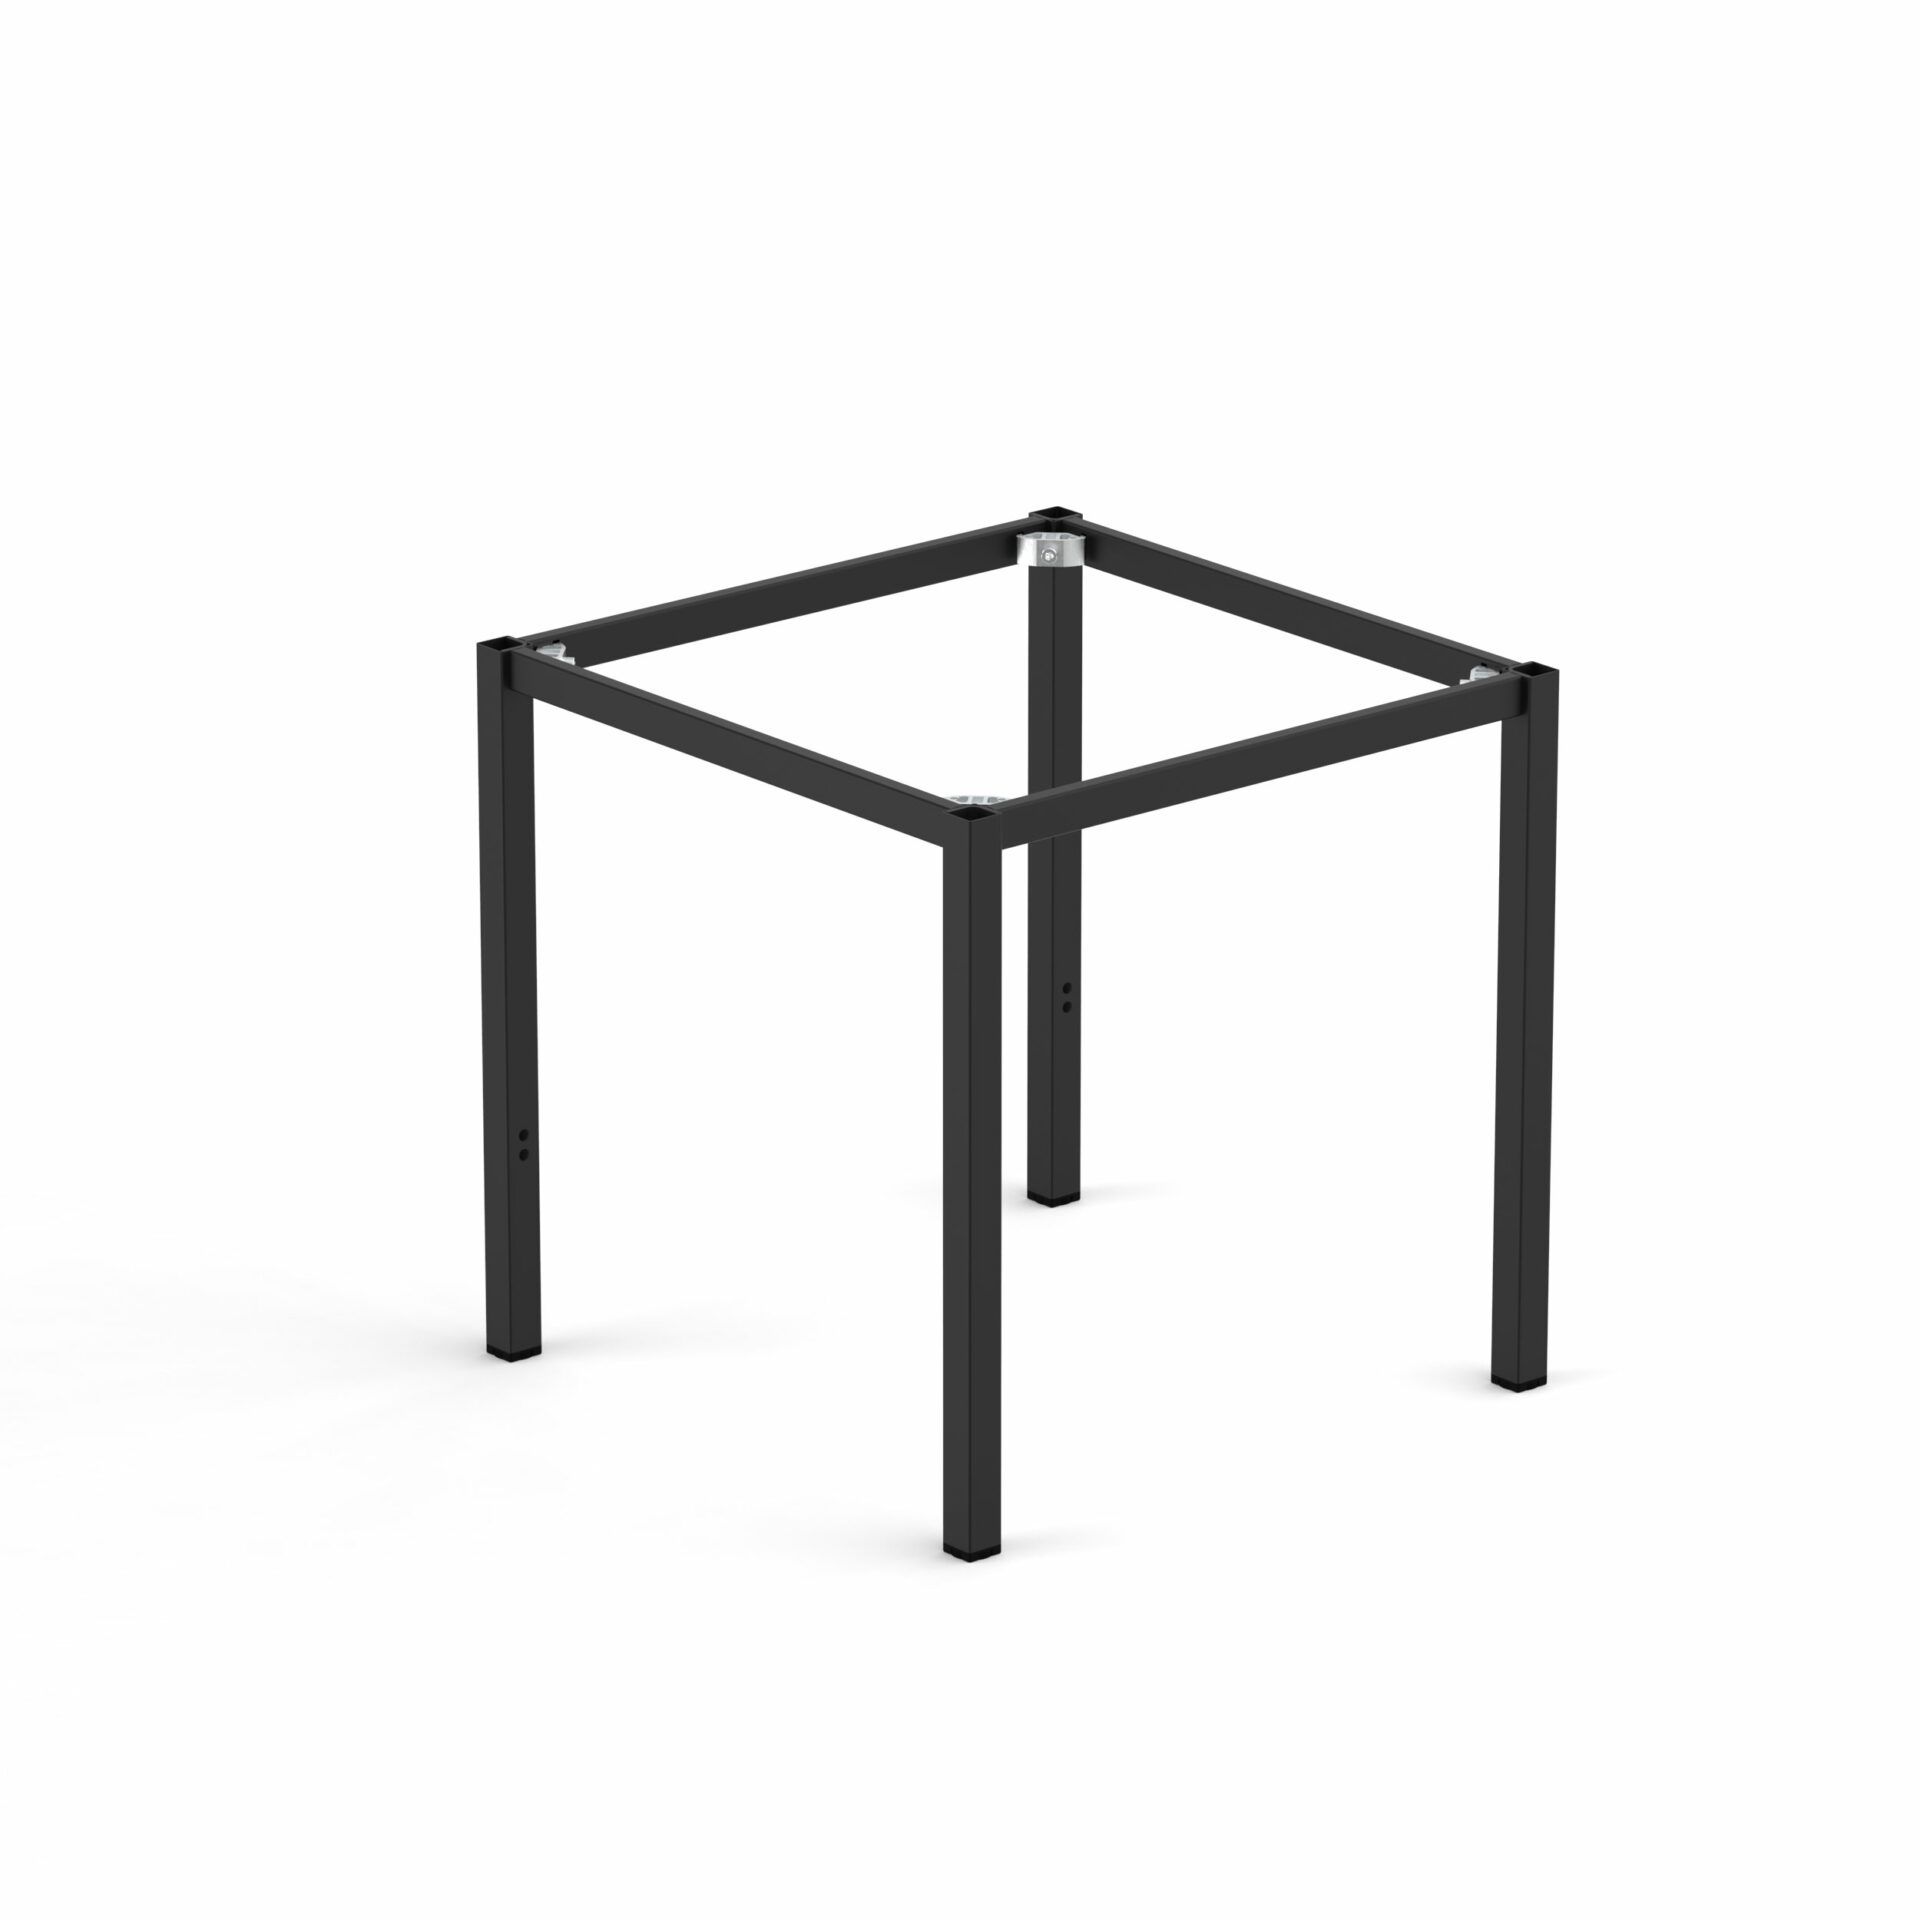 Spire Square leg Table Height Frame 740 x 390 x 720H